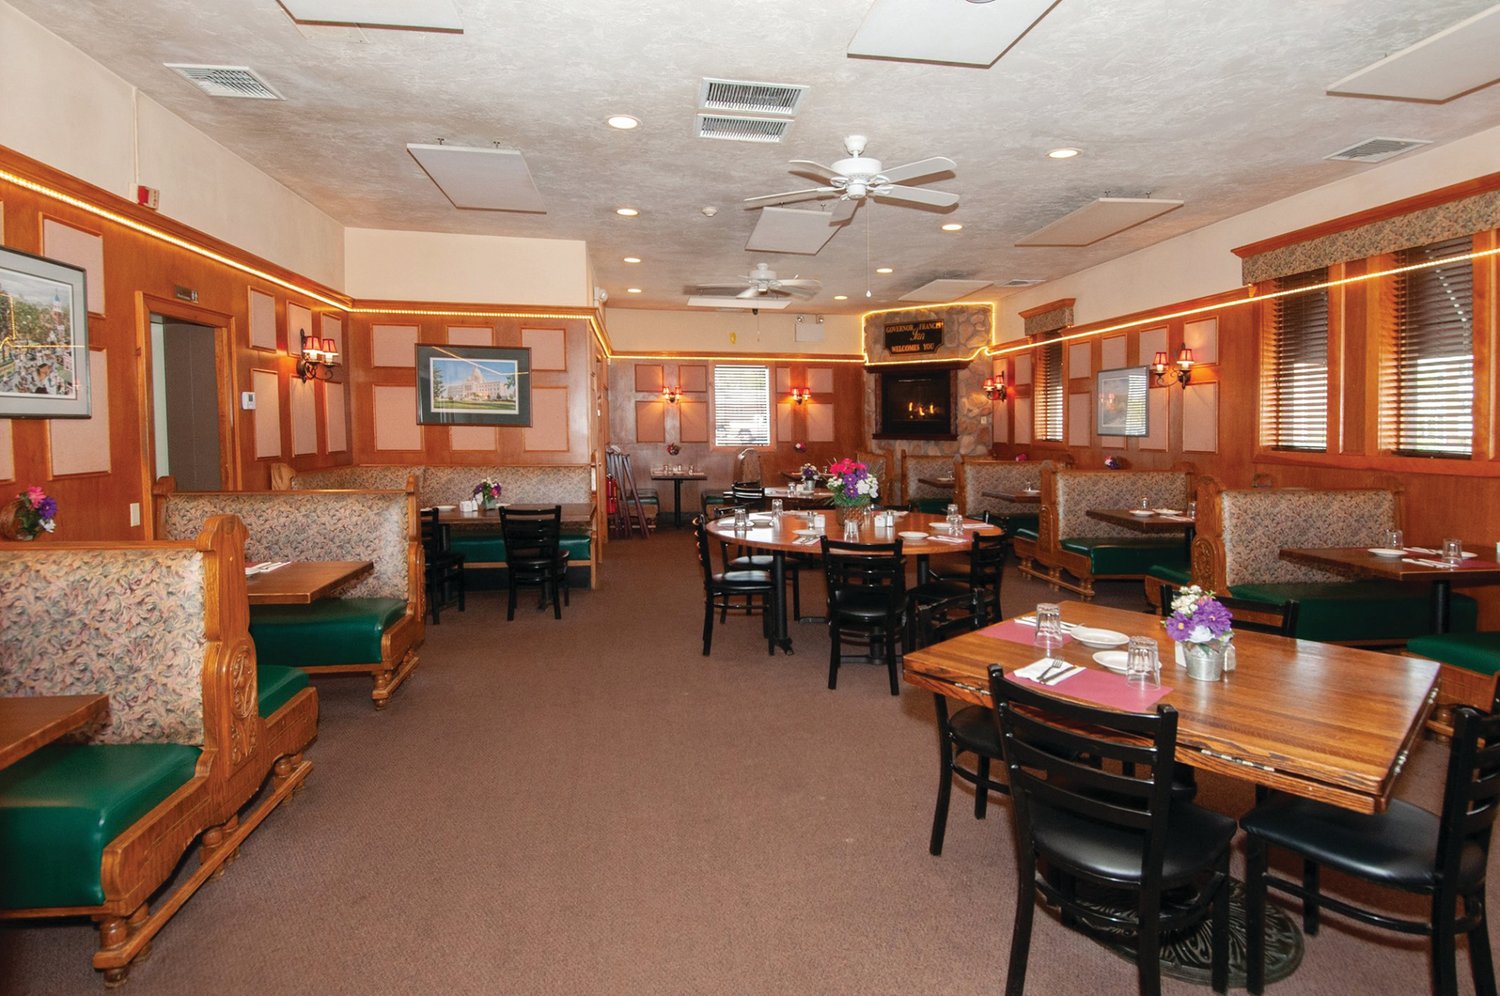 Governor Francis Inn is a popular family-owned restaurant in Warwick with a menu offering a wide variety dishes.